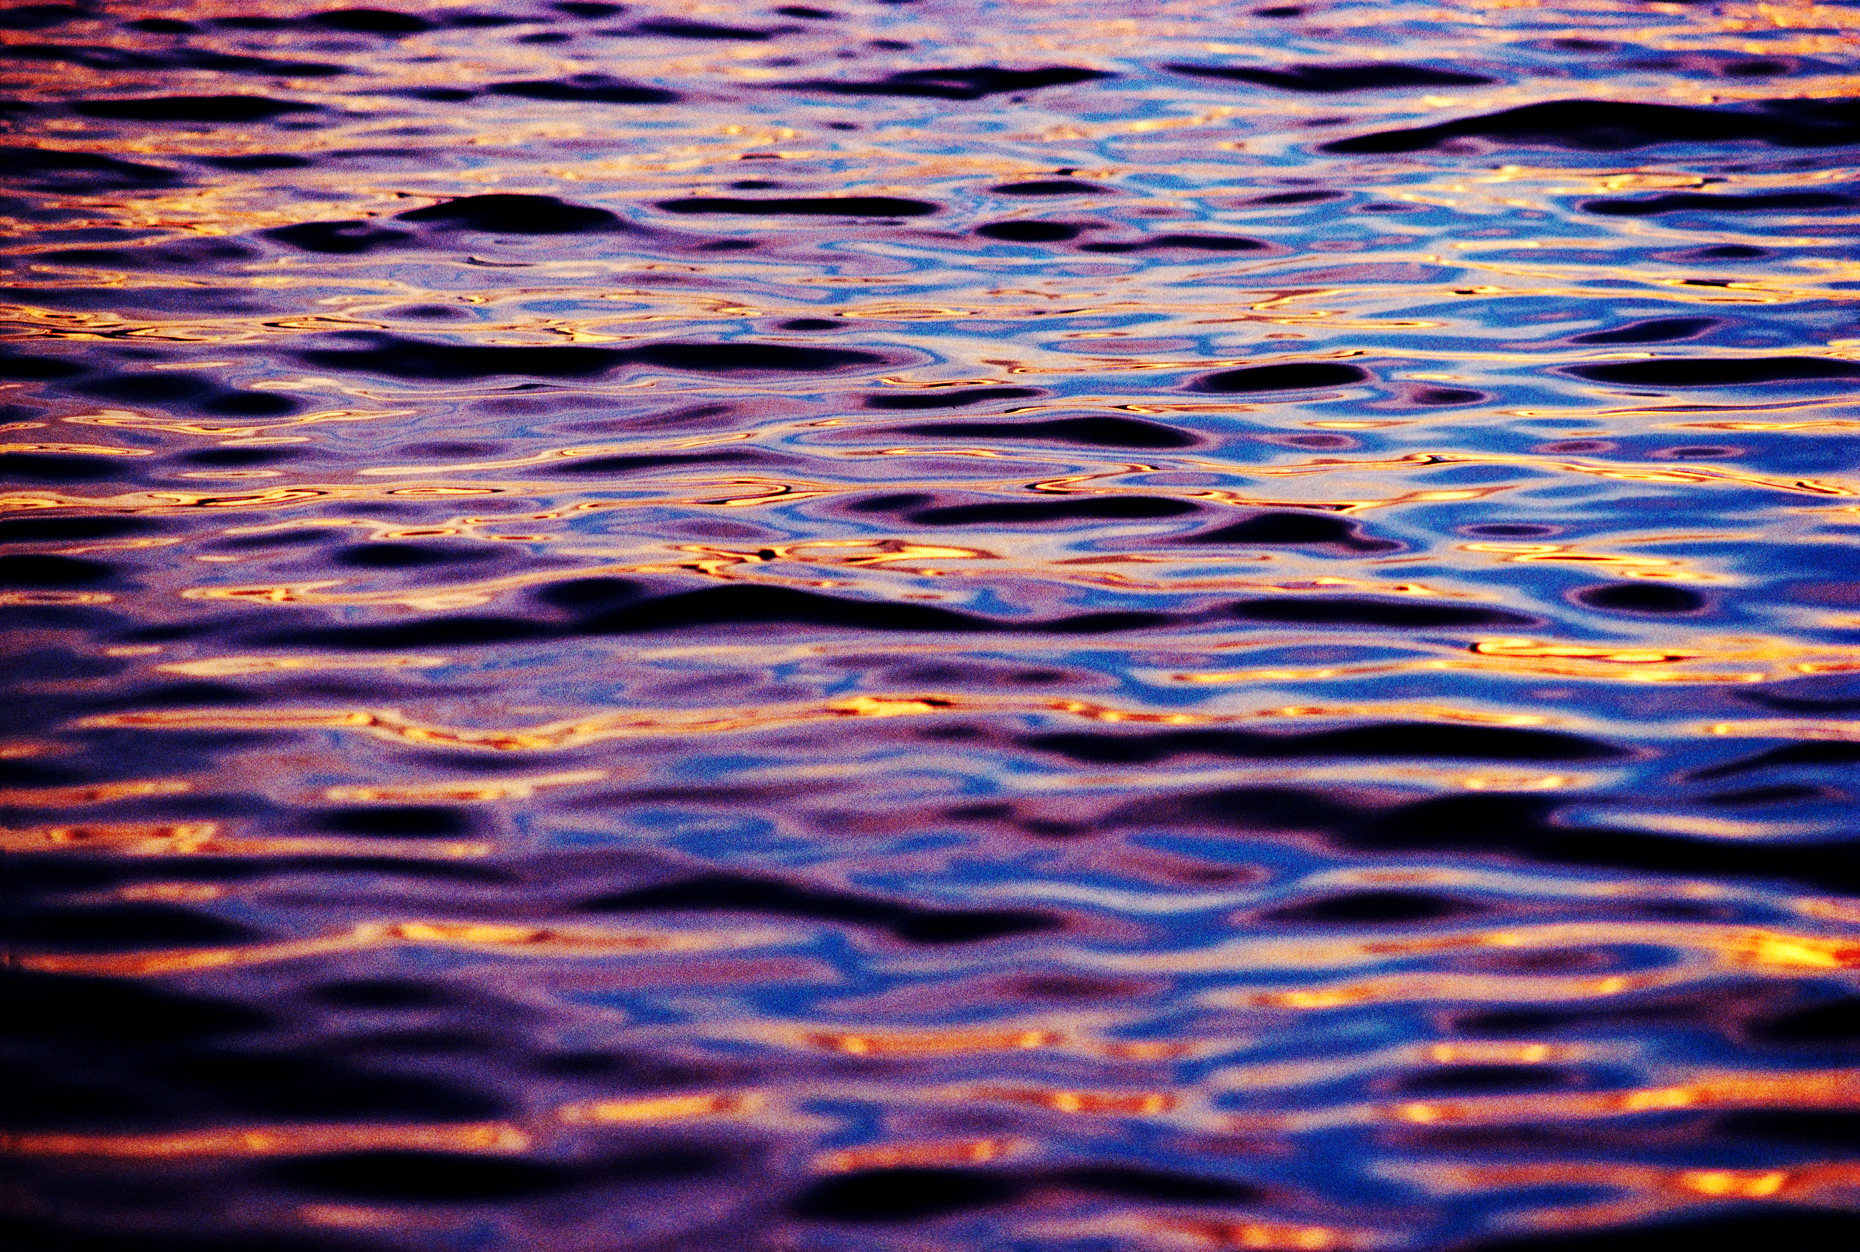 Sunset colors reflected in the ripples of Cumberland Sound, Baff